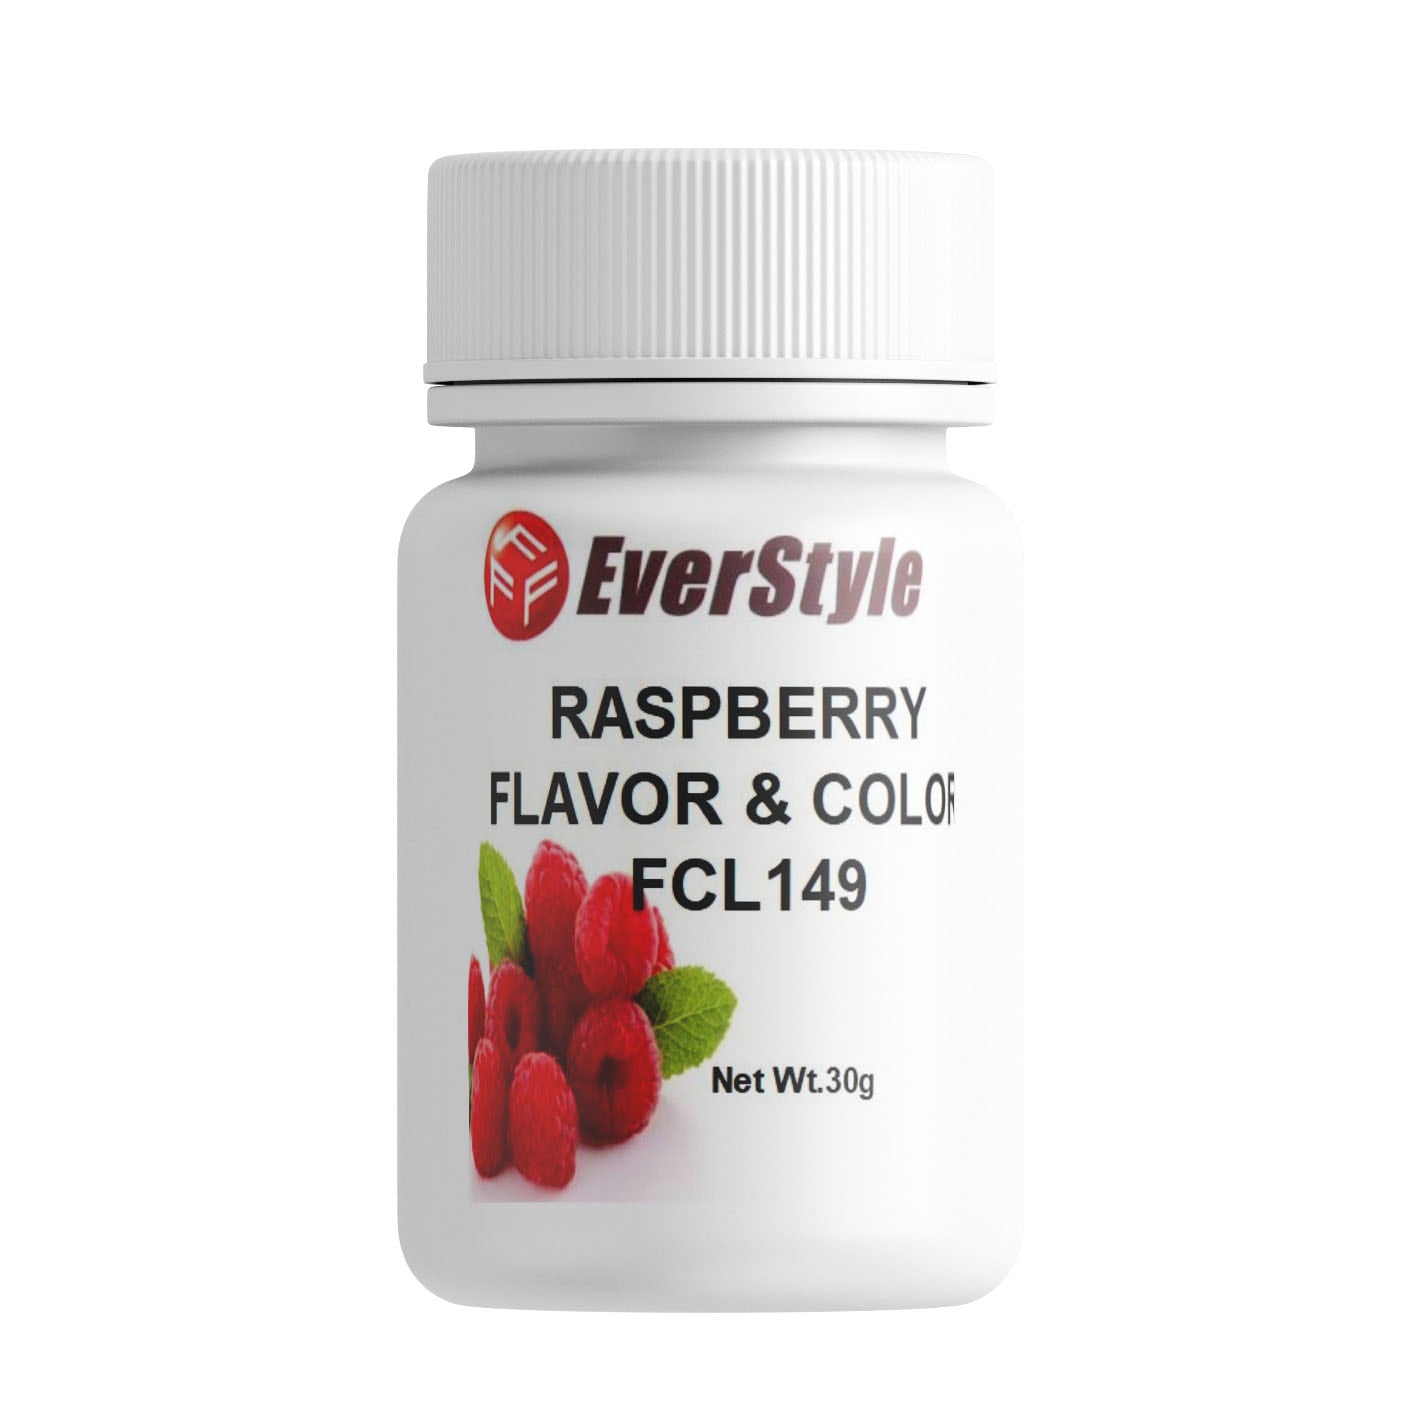 Everstyle Raspberry Flavor and Color 30g (FCL149)